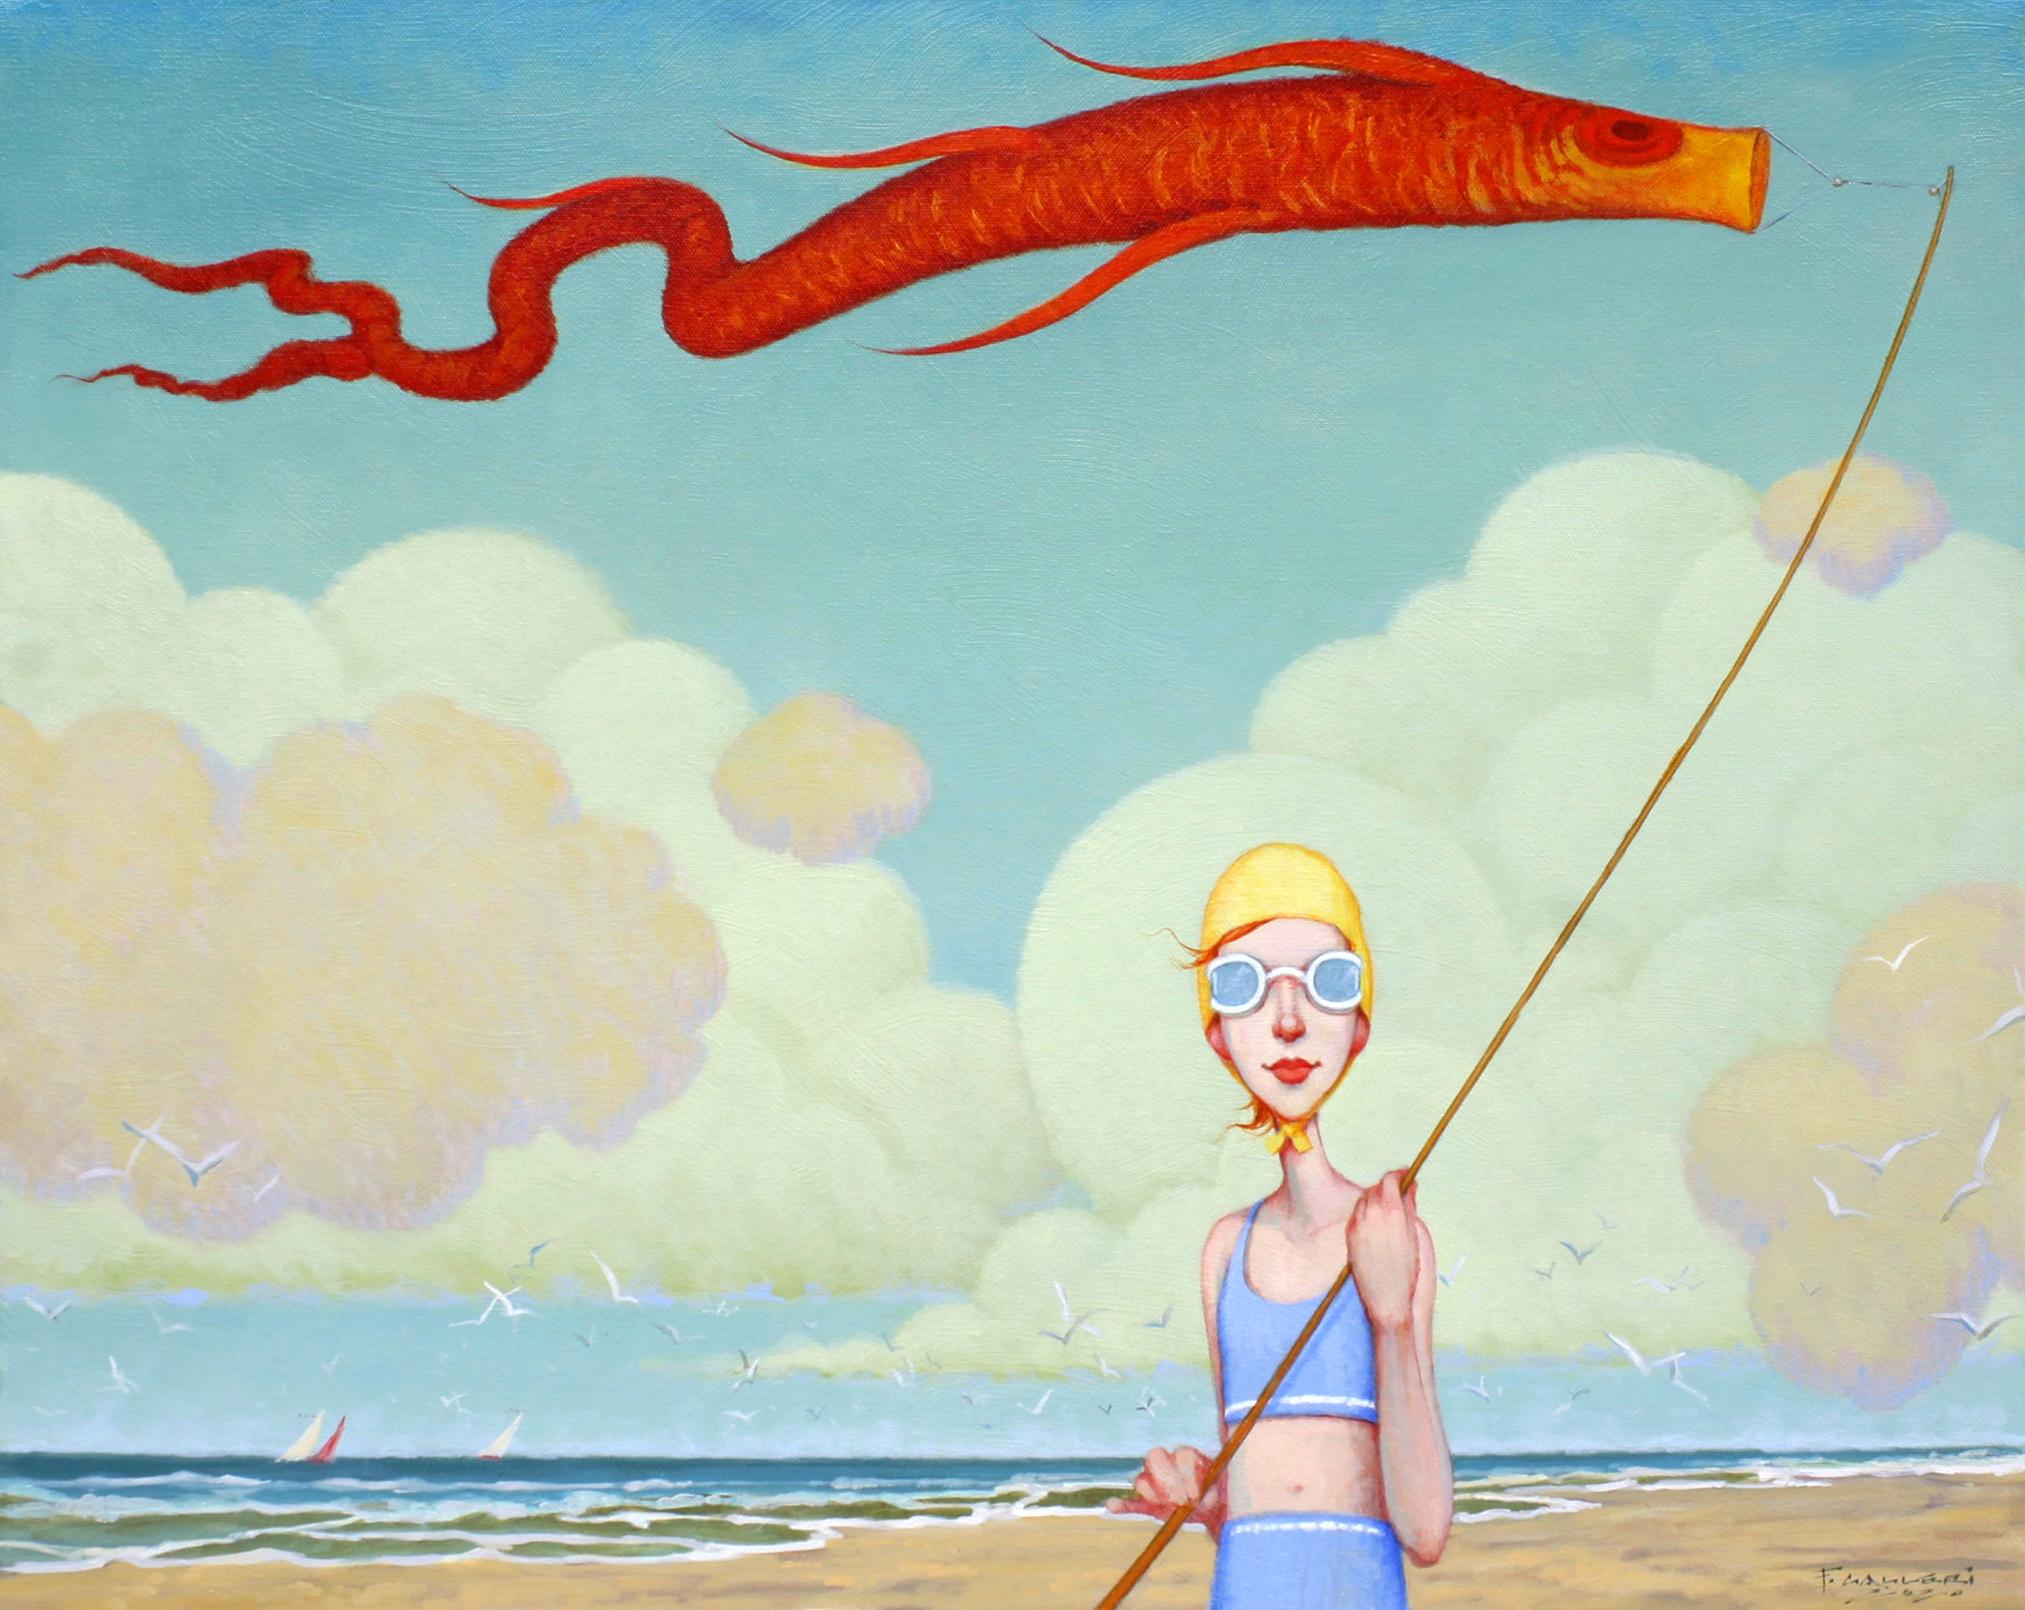 Fred Calleri Figurative Painting - "Toy Koi" oil painting of a girl with a bonnet flying a koi kite on the beach